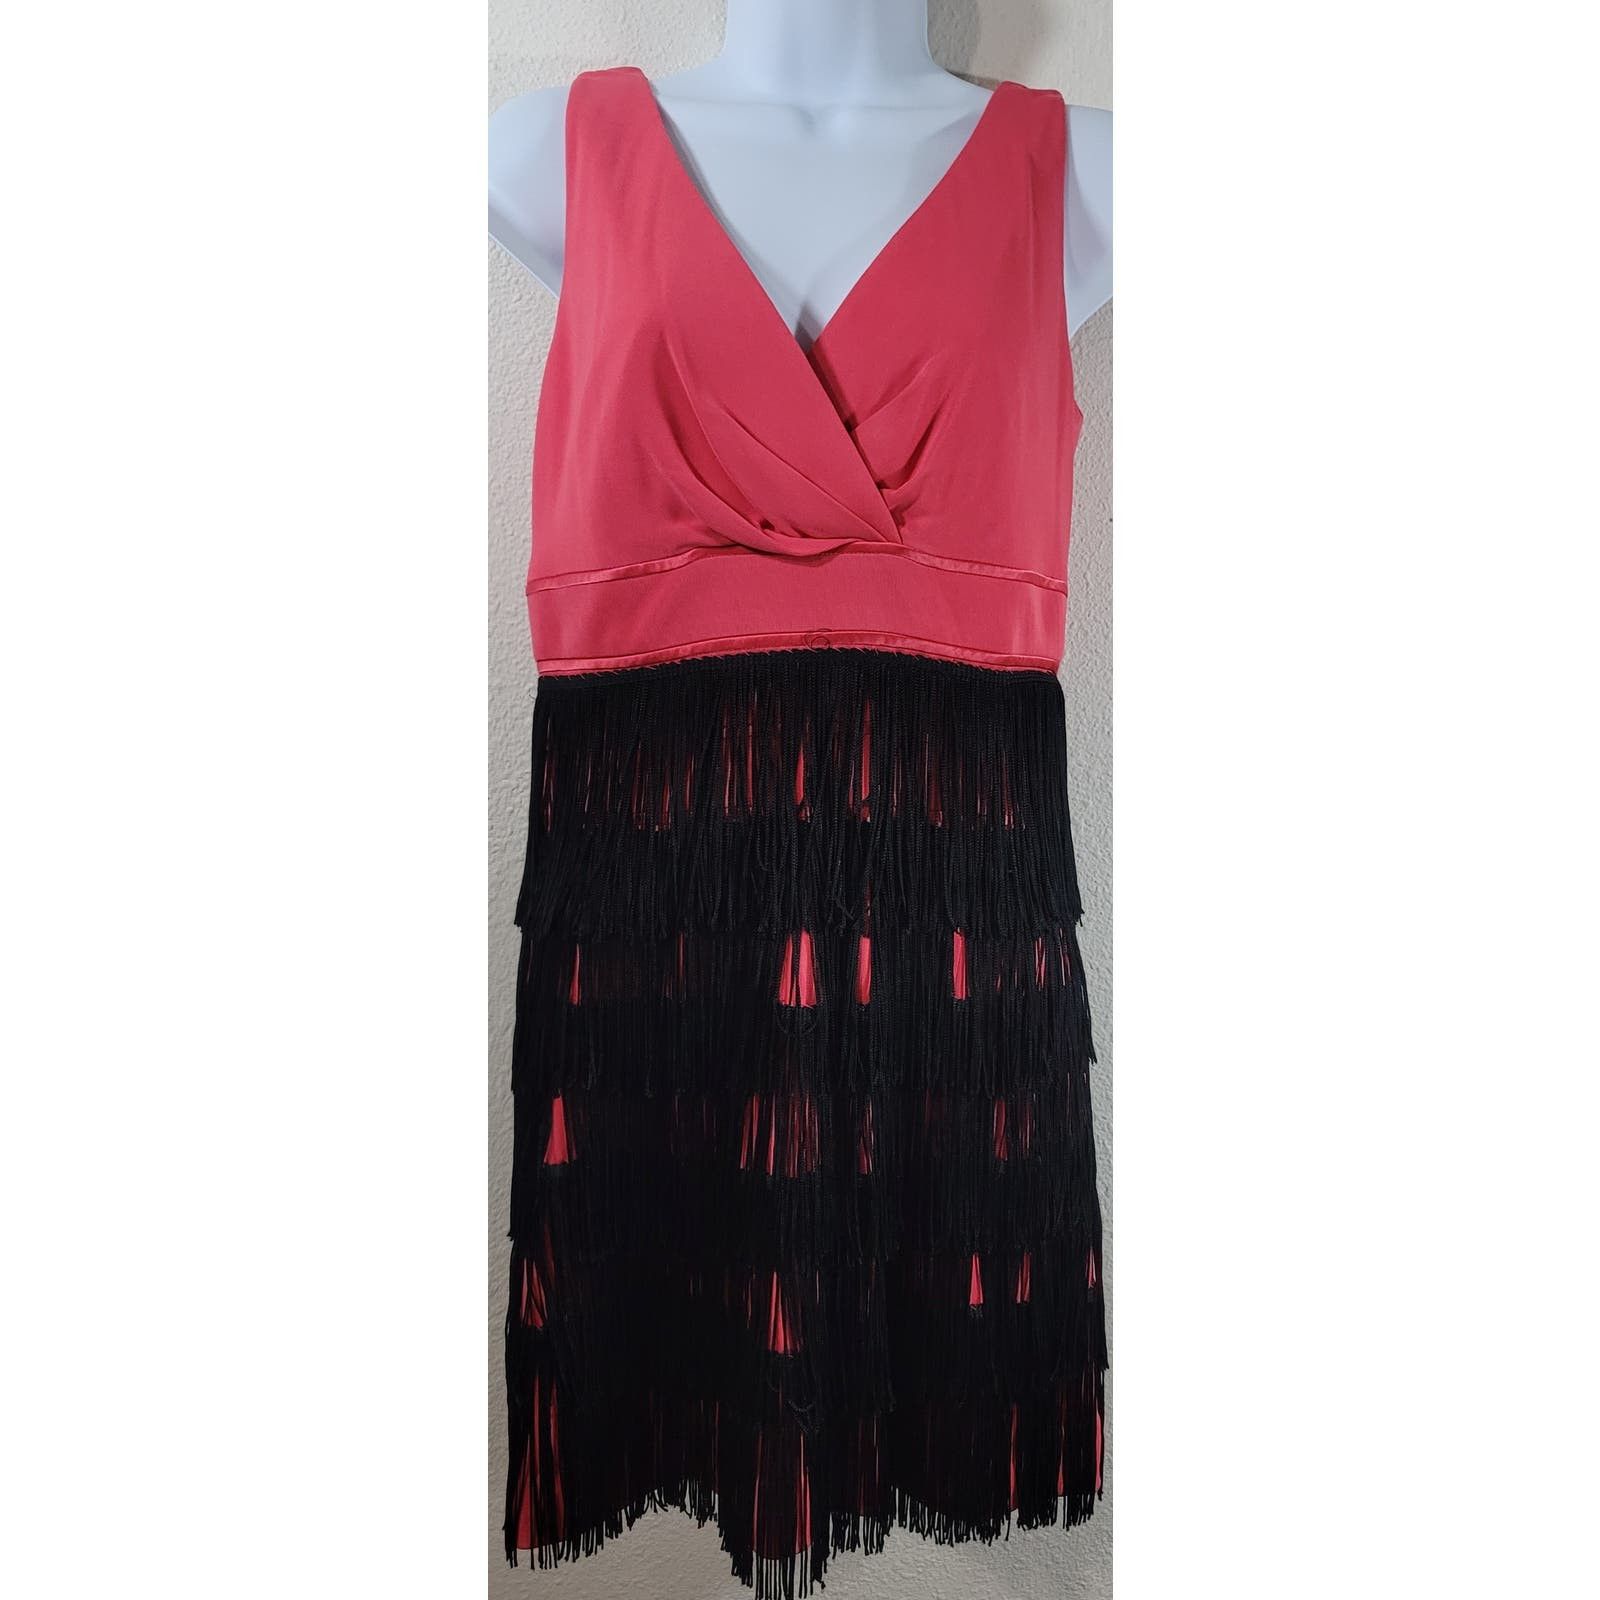 Other Kay Unger Coral Crisscross Bodice Fringe Skirt Dress 6 Size M / US 6-8 / IT 42-44 - 1 Preview